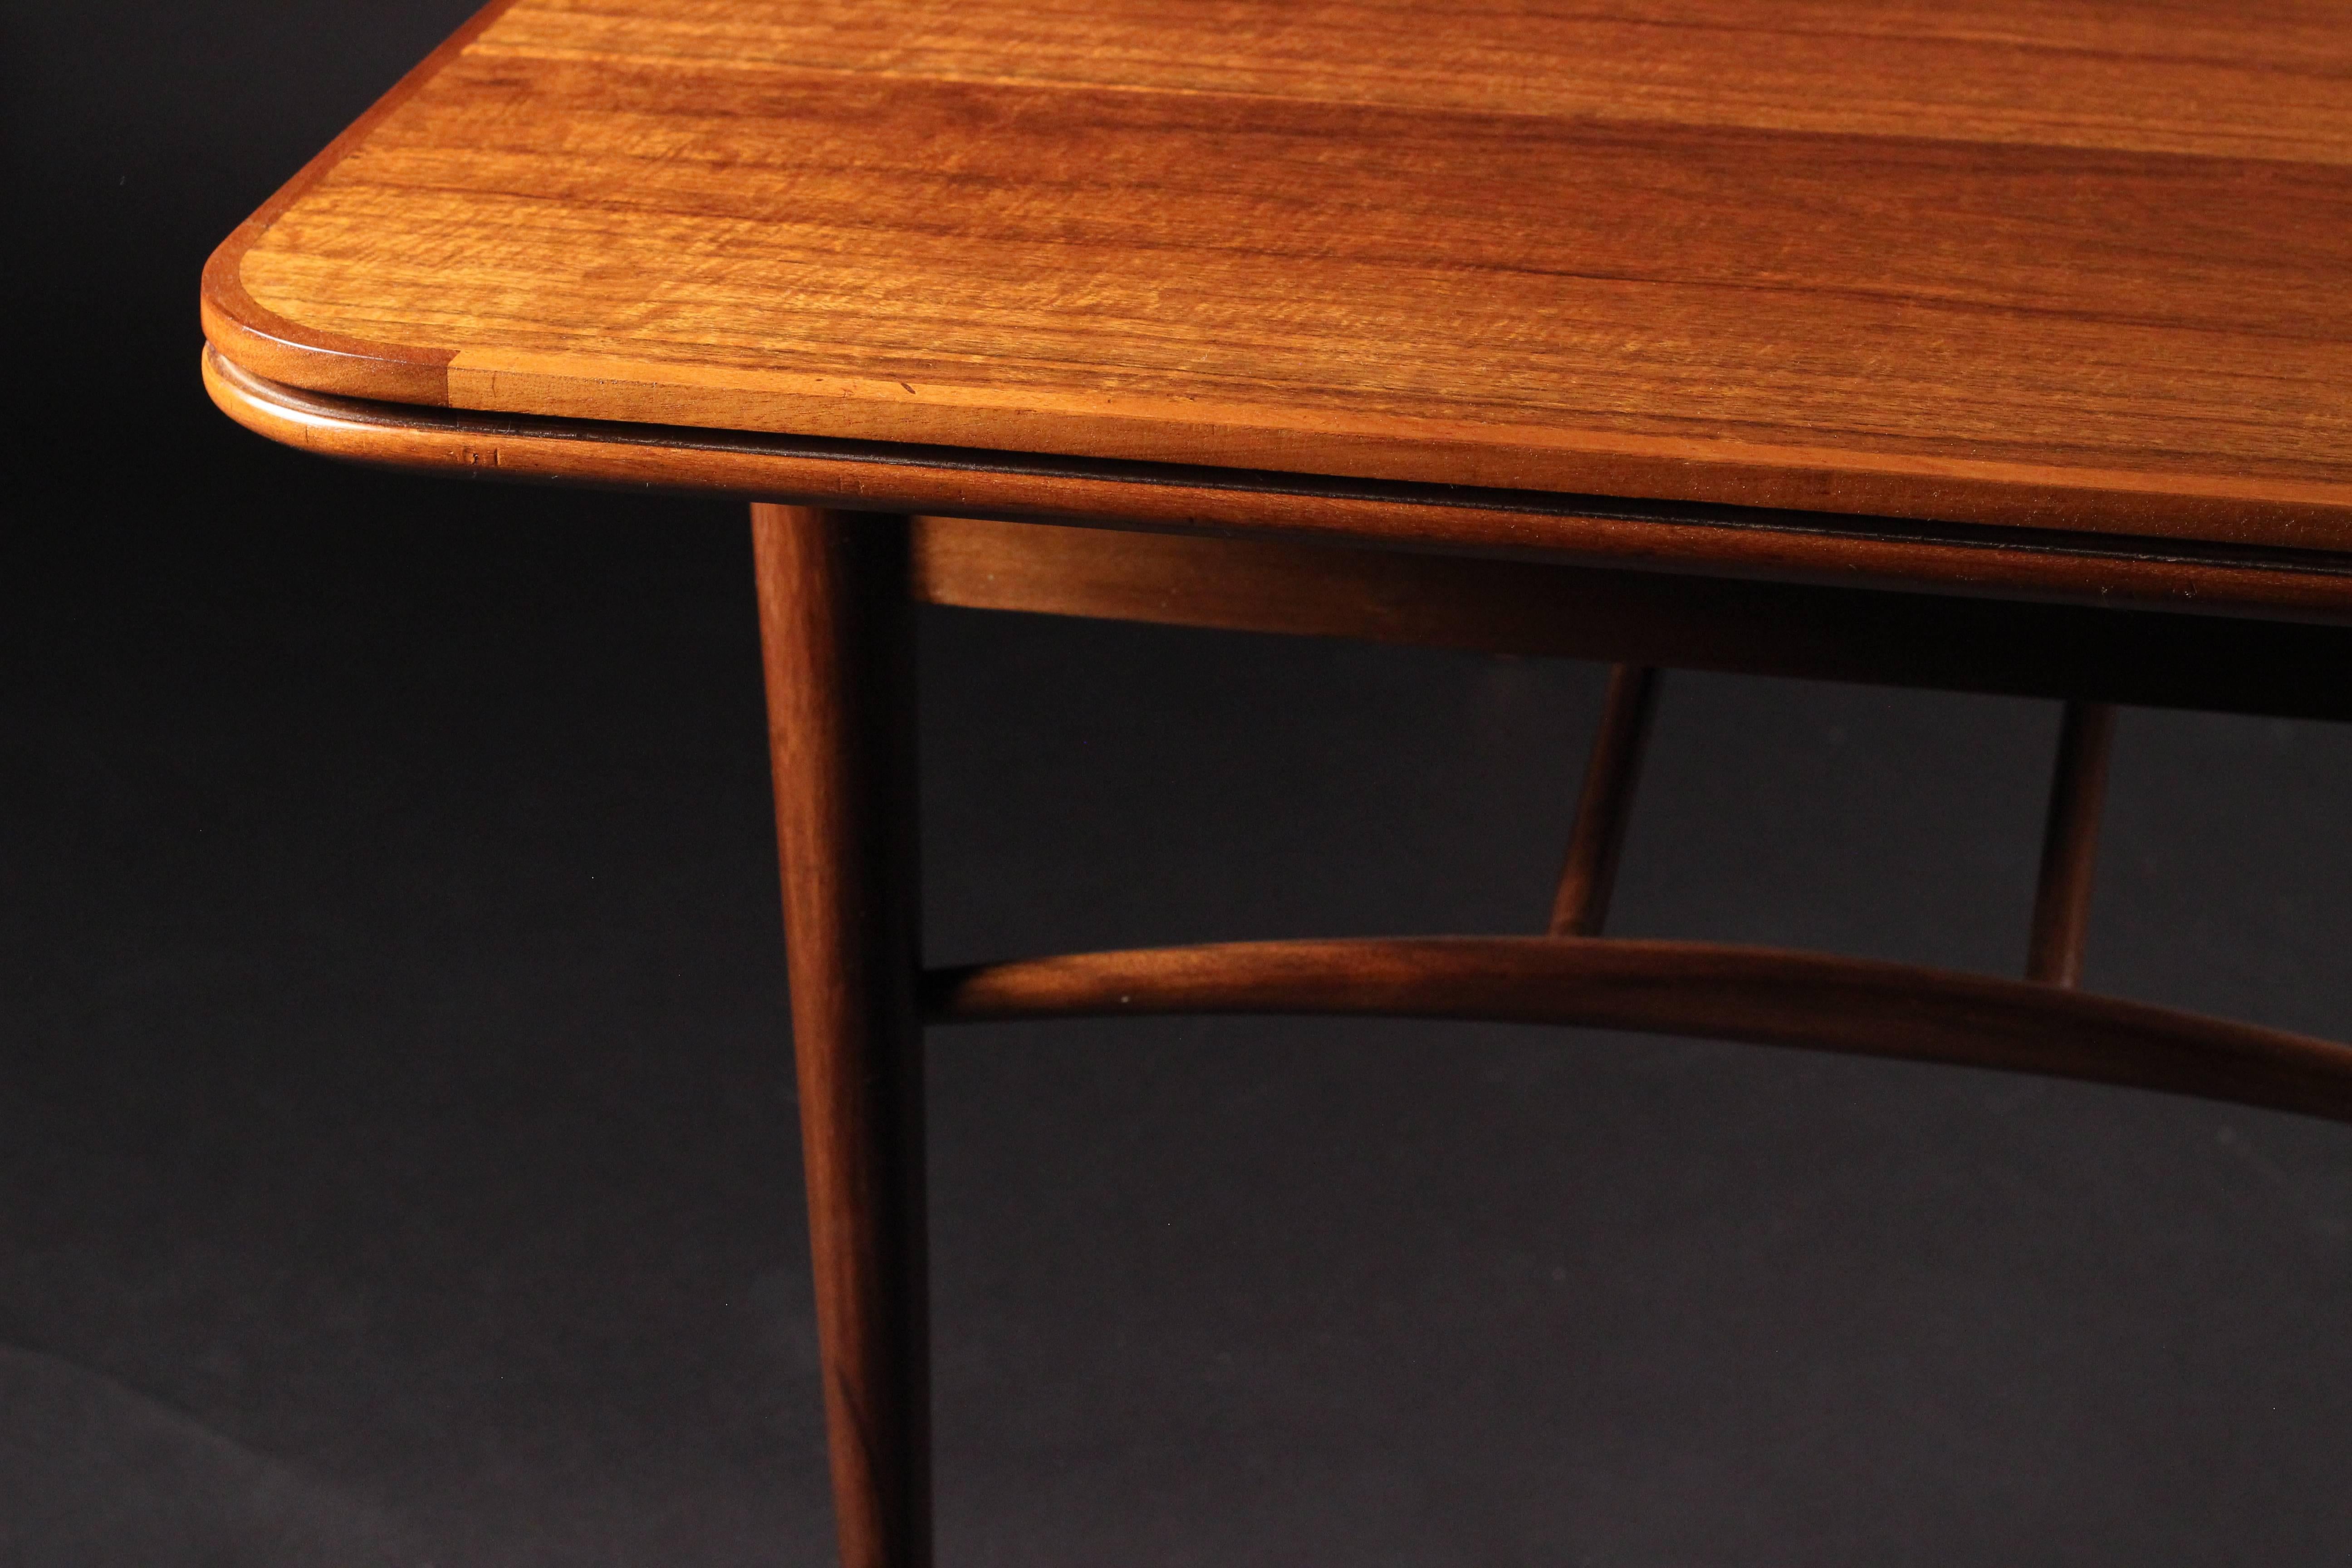 Mahogany Mid-Century Modern Dining Table by Robert Heritage for Archie Shine